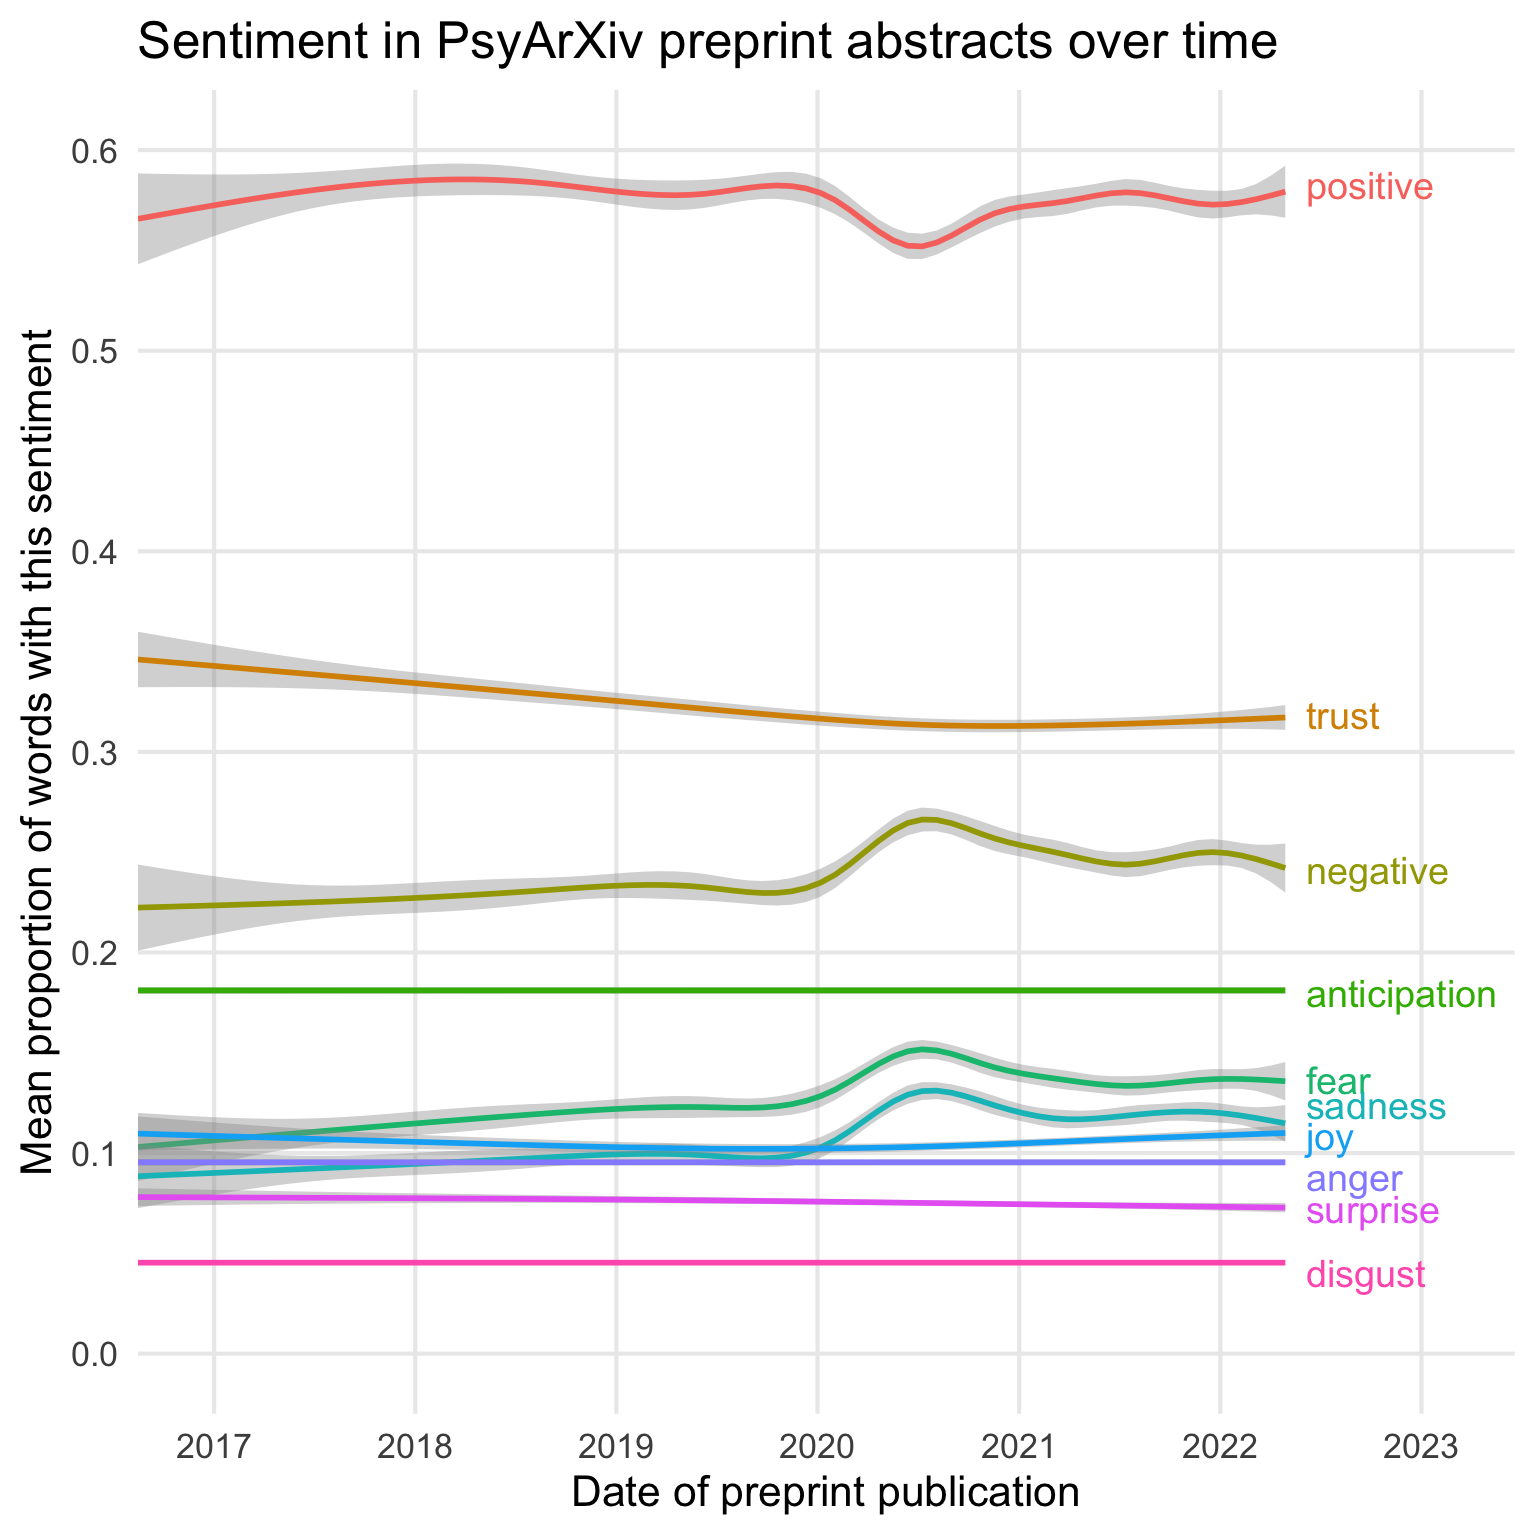 Plot of the proportion of words in PsyArXiv preprint abstracts with different sentiments over time. Most are fairly flat, but in early 2020, positive sentiment decreased and negative sentiment increased, along with fear and sadness. Overall, about 60% of abstract words are positive, 35% trust, 25% negative, 10-15% fear, sadness and joy, and< 10% anger, surprise and disgust.